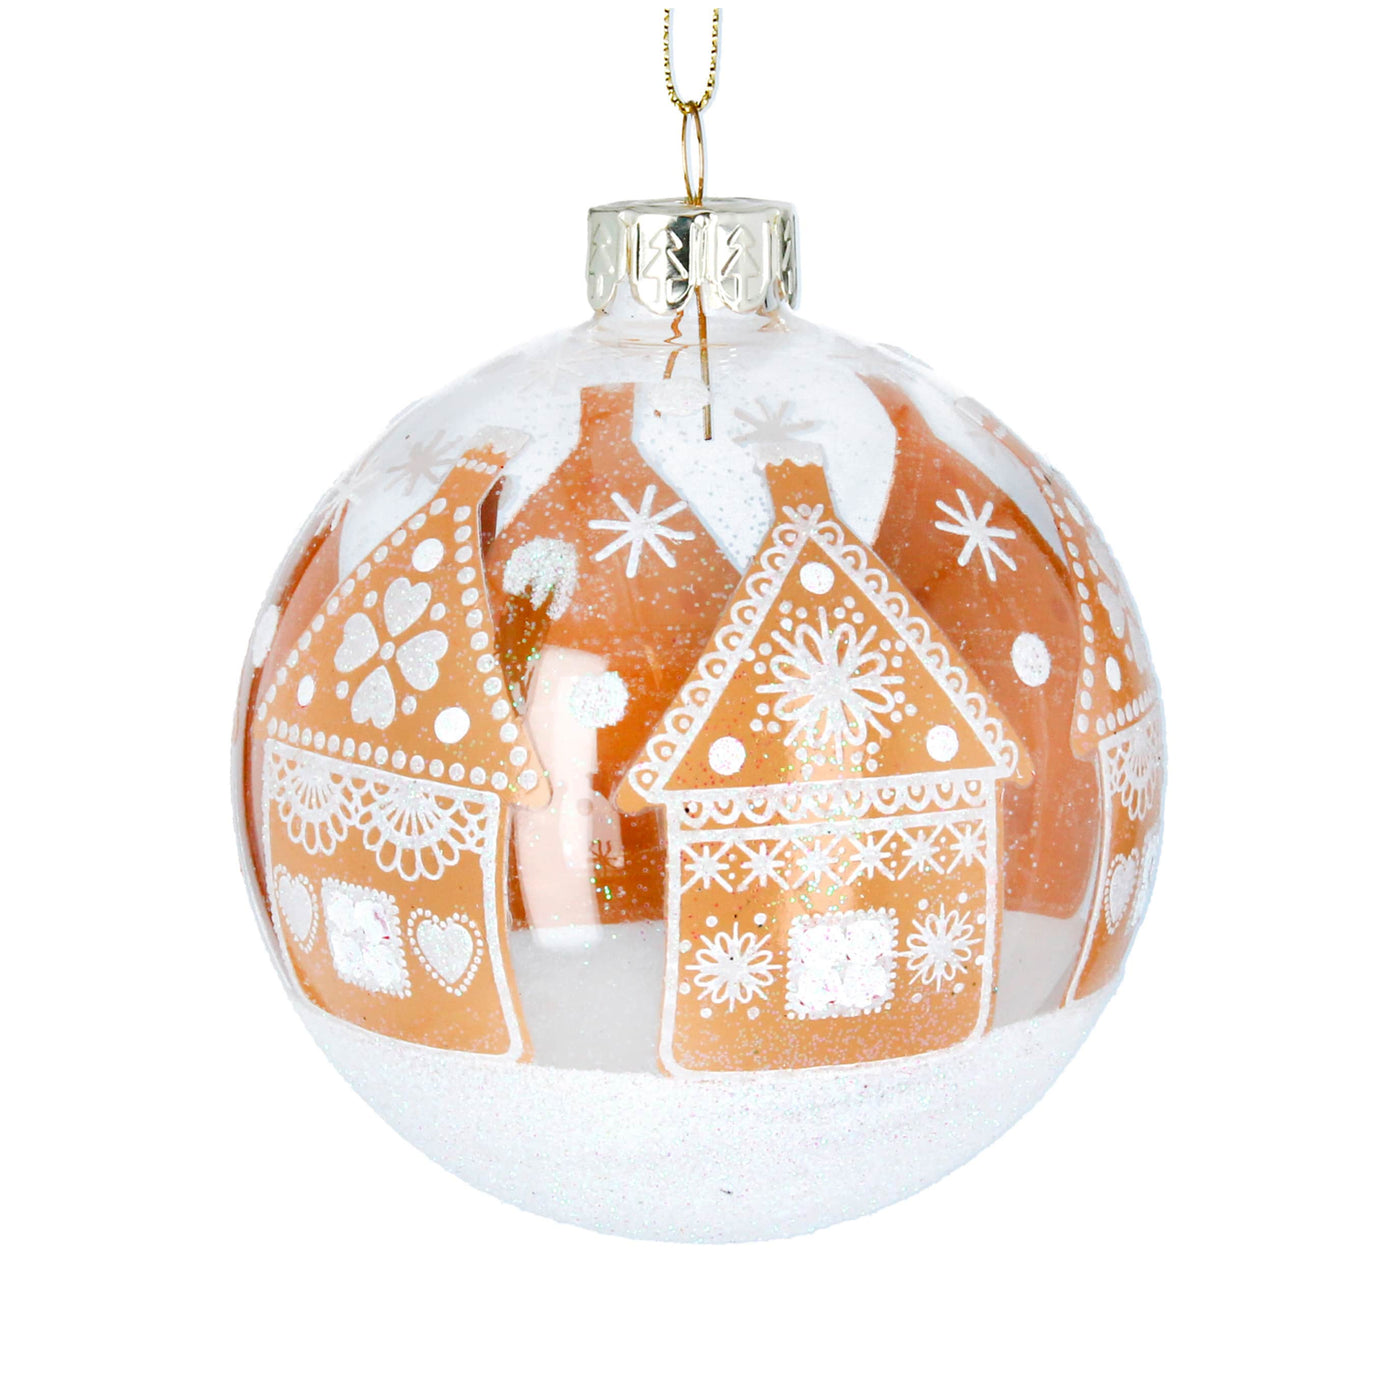 Gisela Graham Christmas Christmas Decorations Snowy Gingerbread Glass Baubles